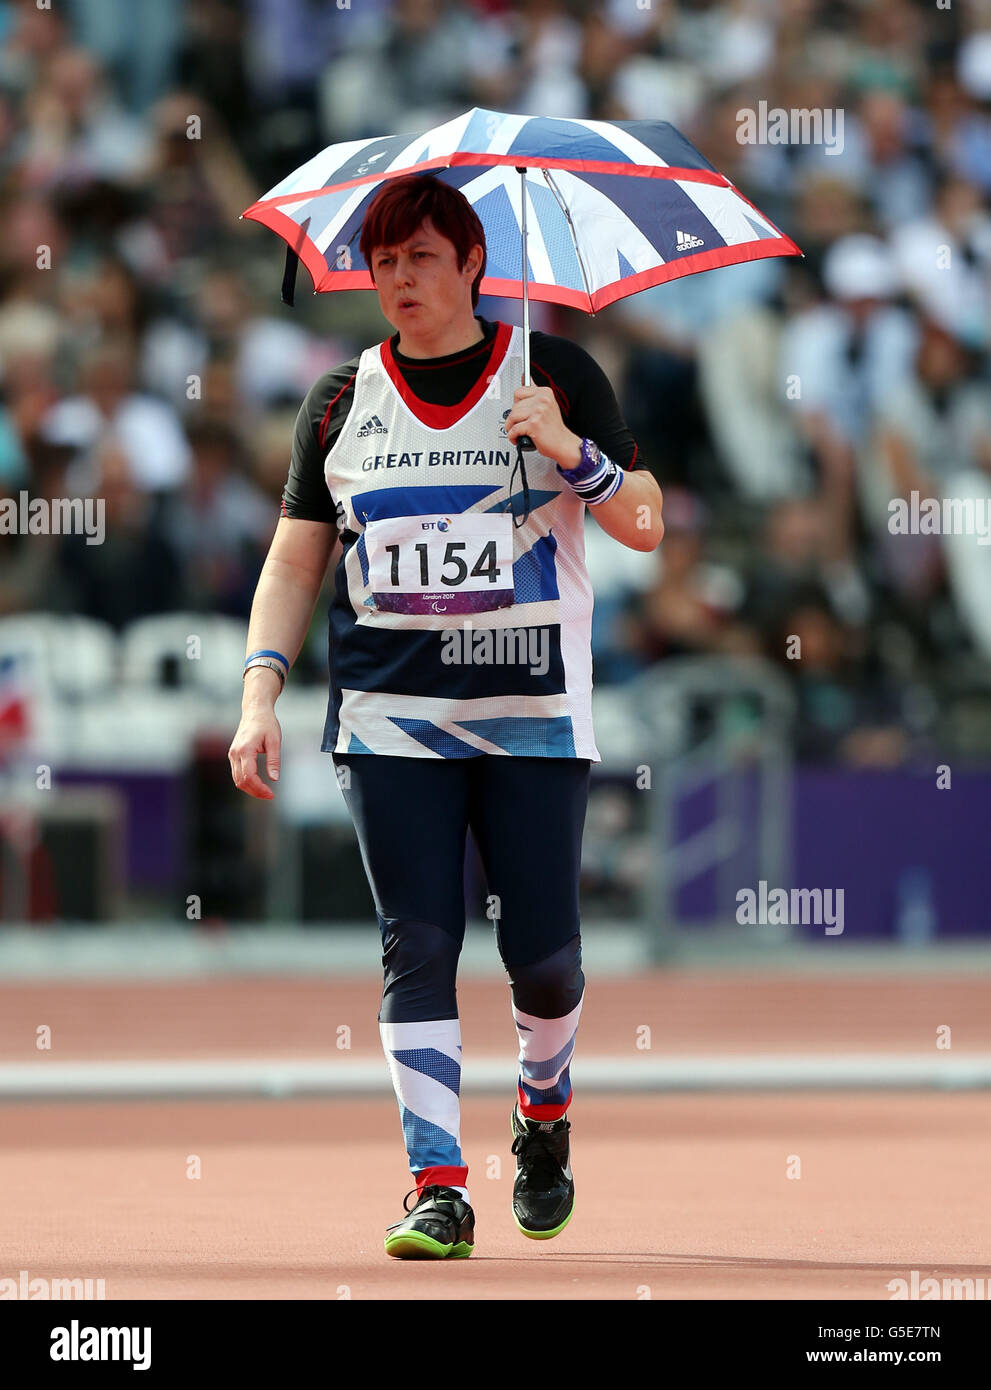 London Paralympic Games - Day 8. Great Britain's Beverley Jones during the Women's Discus Throw F37 category in the Olympic Stadium. Stock Photo